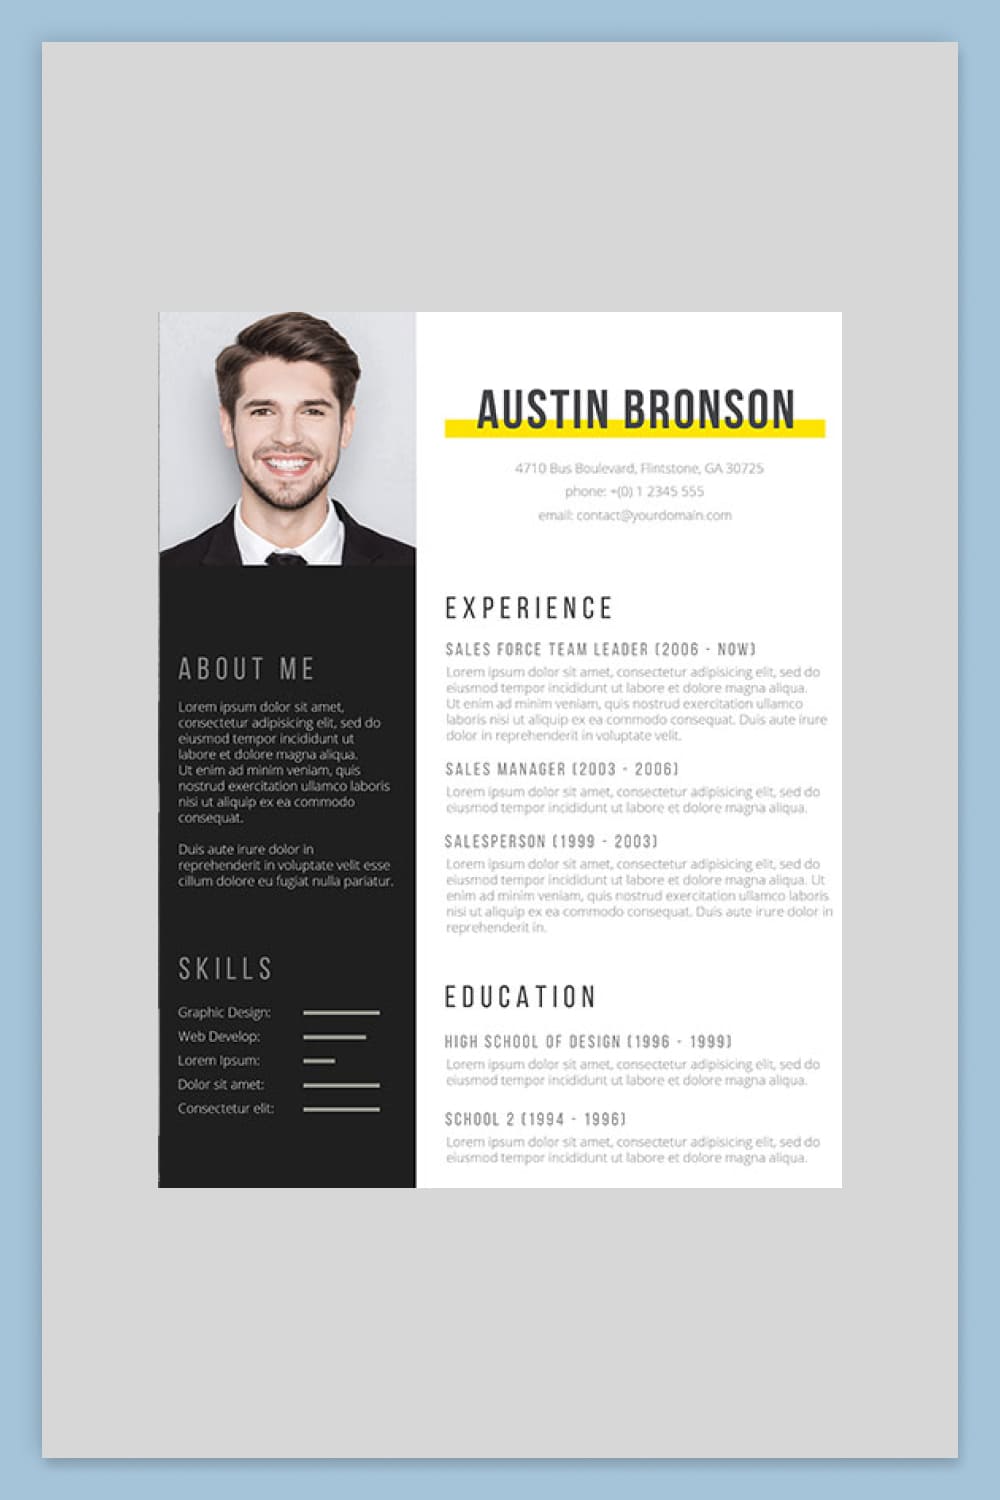 Two-column resume with large photo, black and white background, and yellow accent.